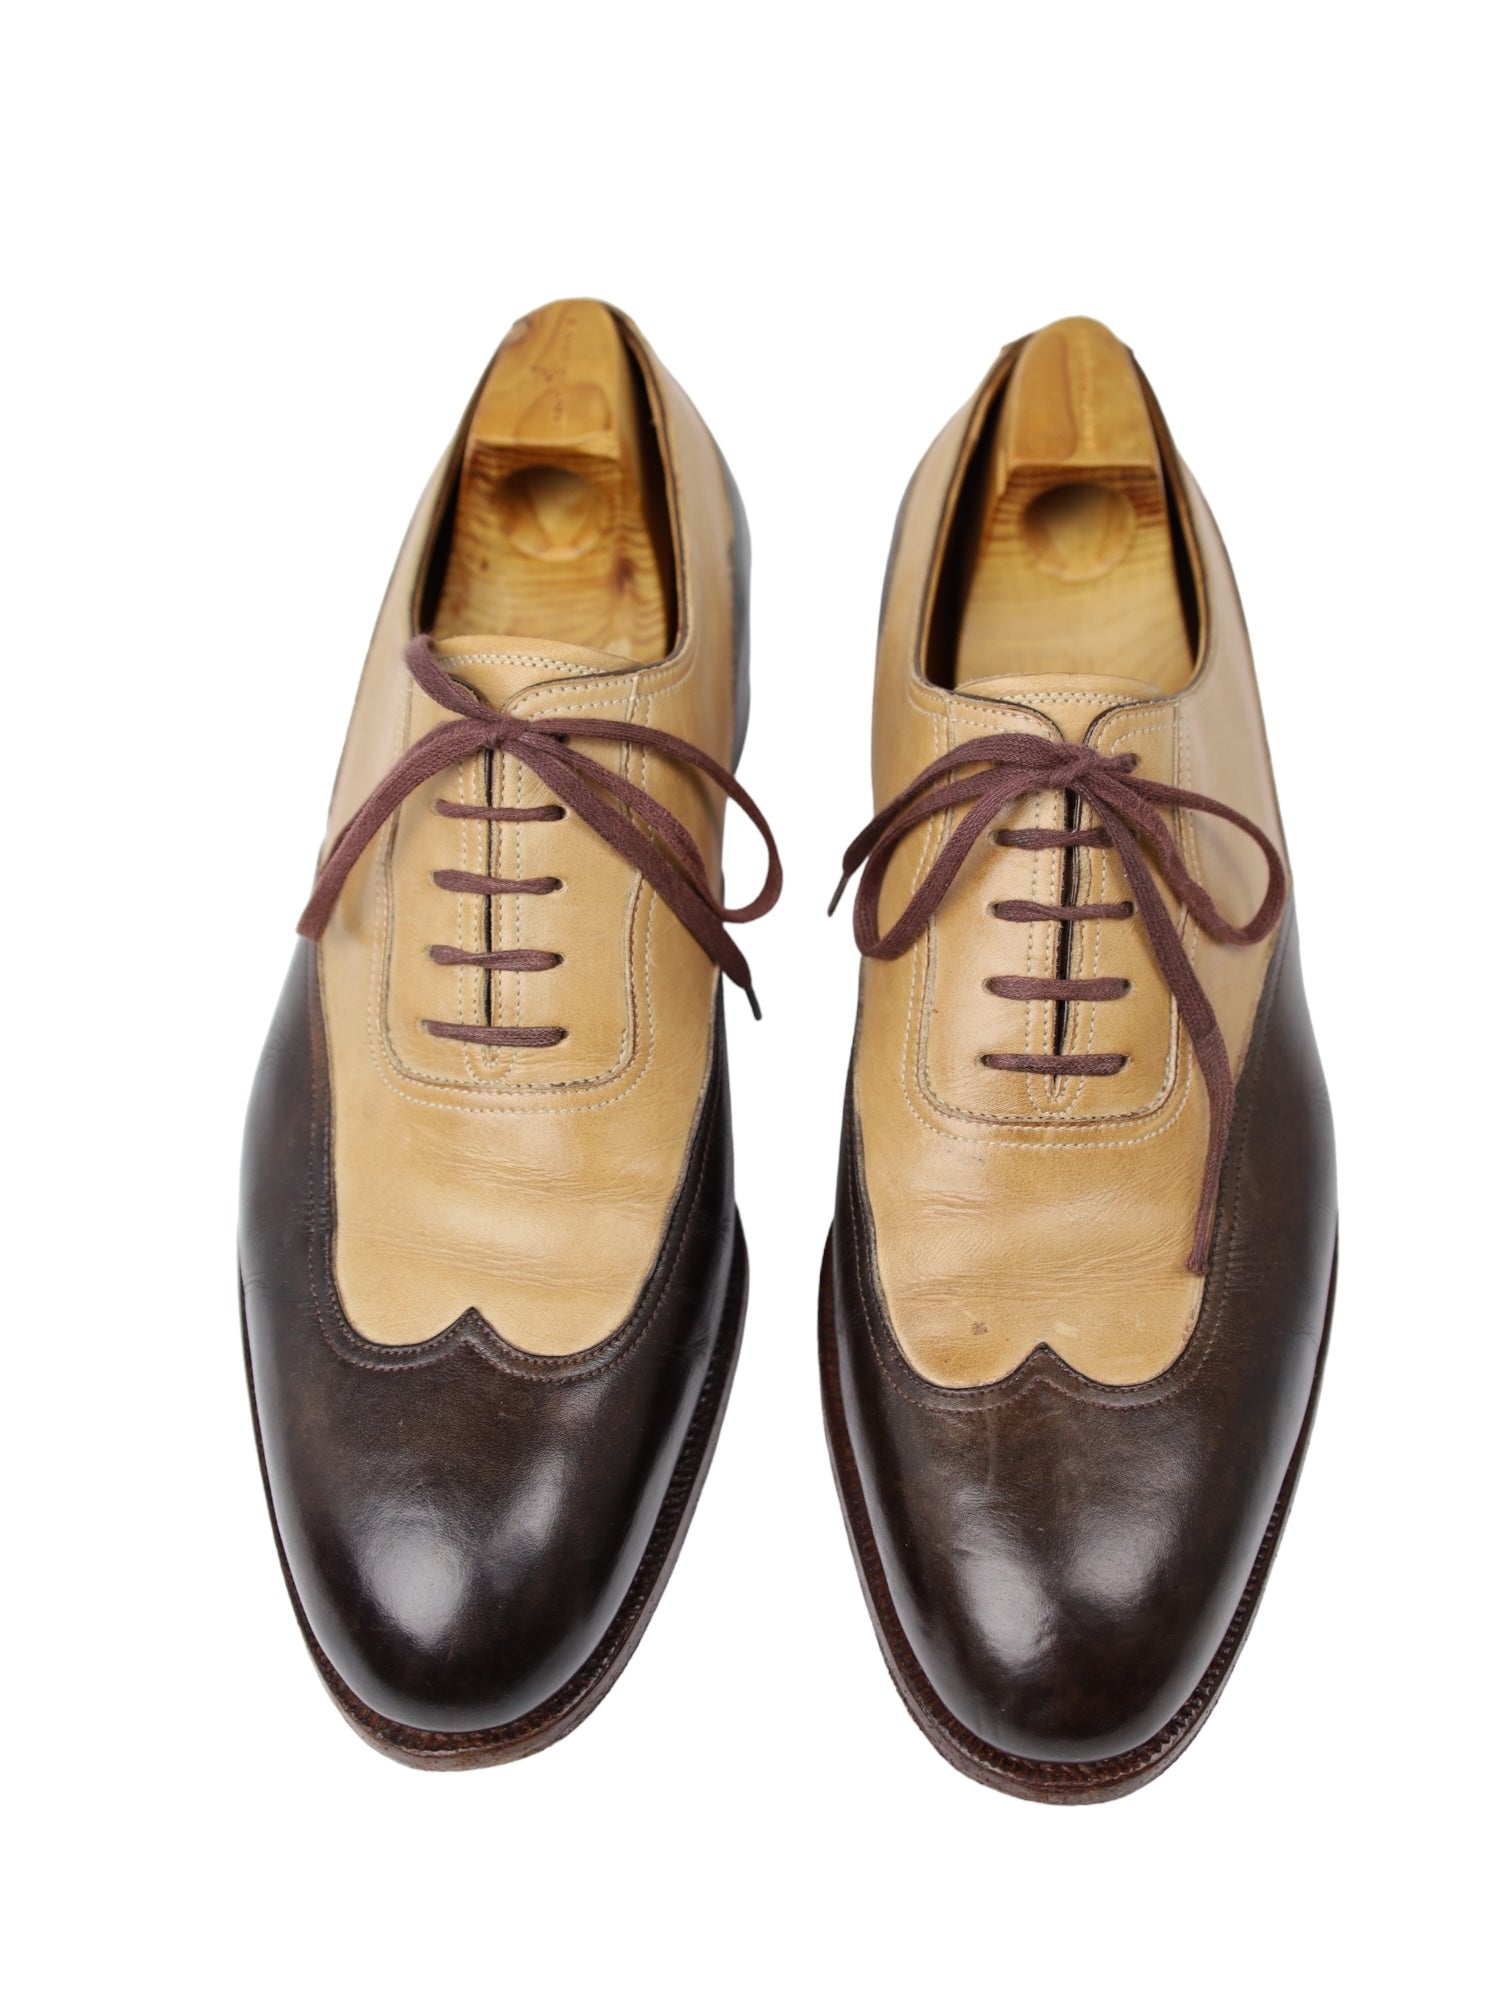 Saint Crispins Brown Wing-Tip Oxford Shoes